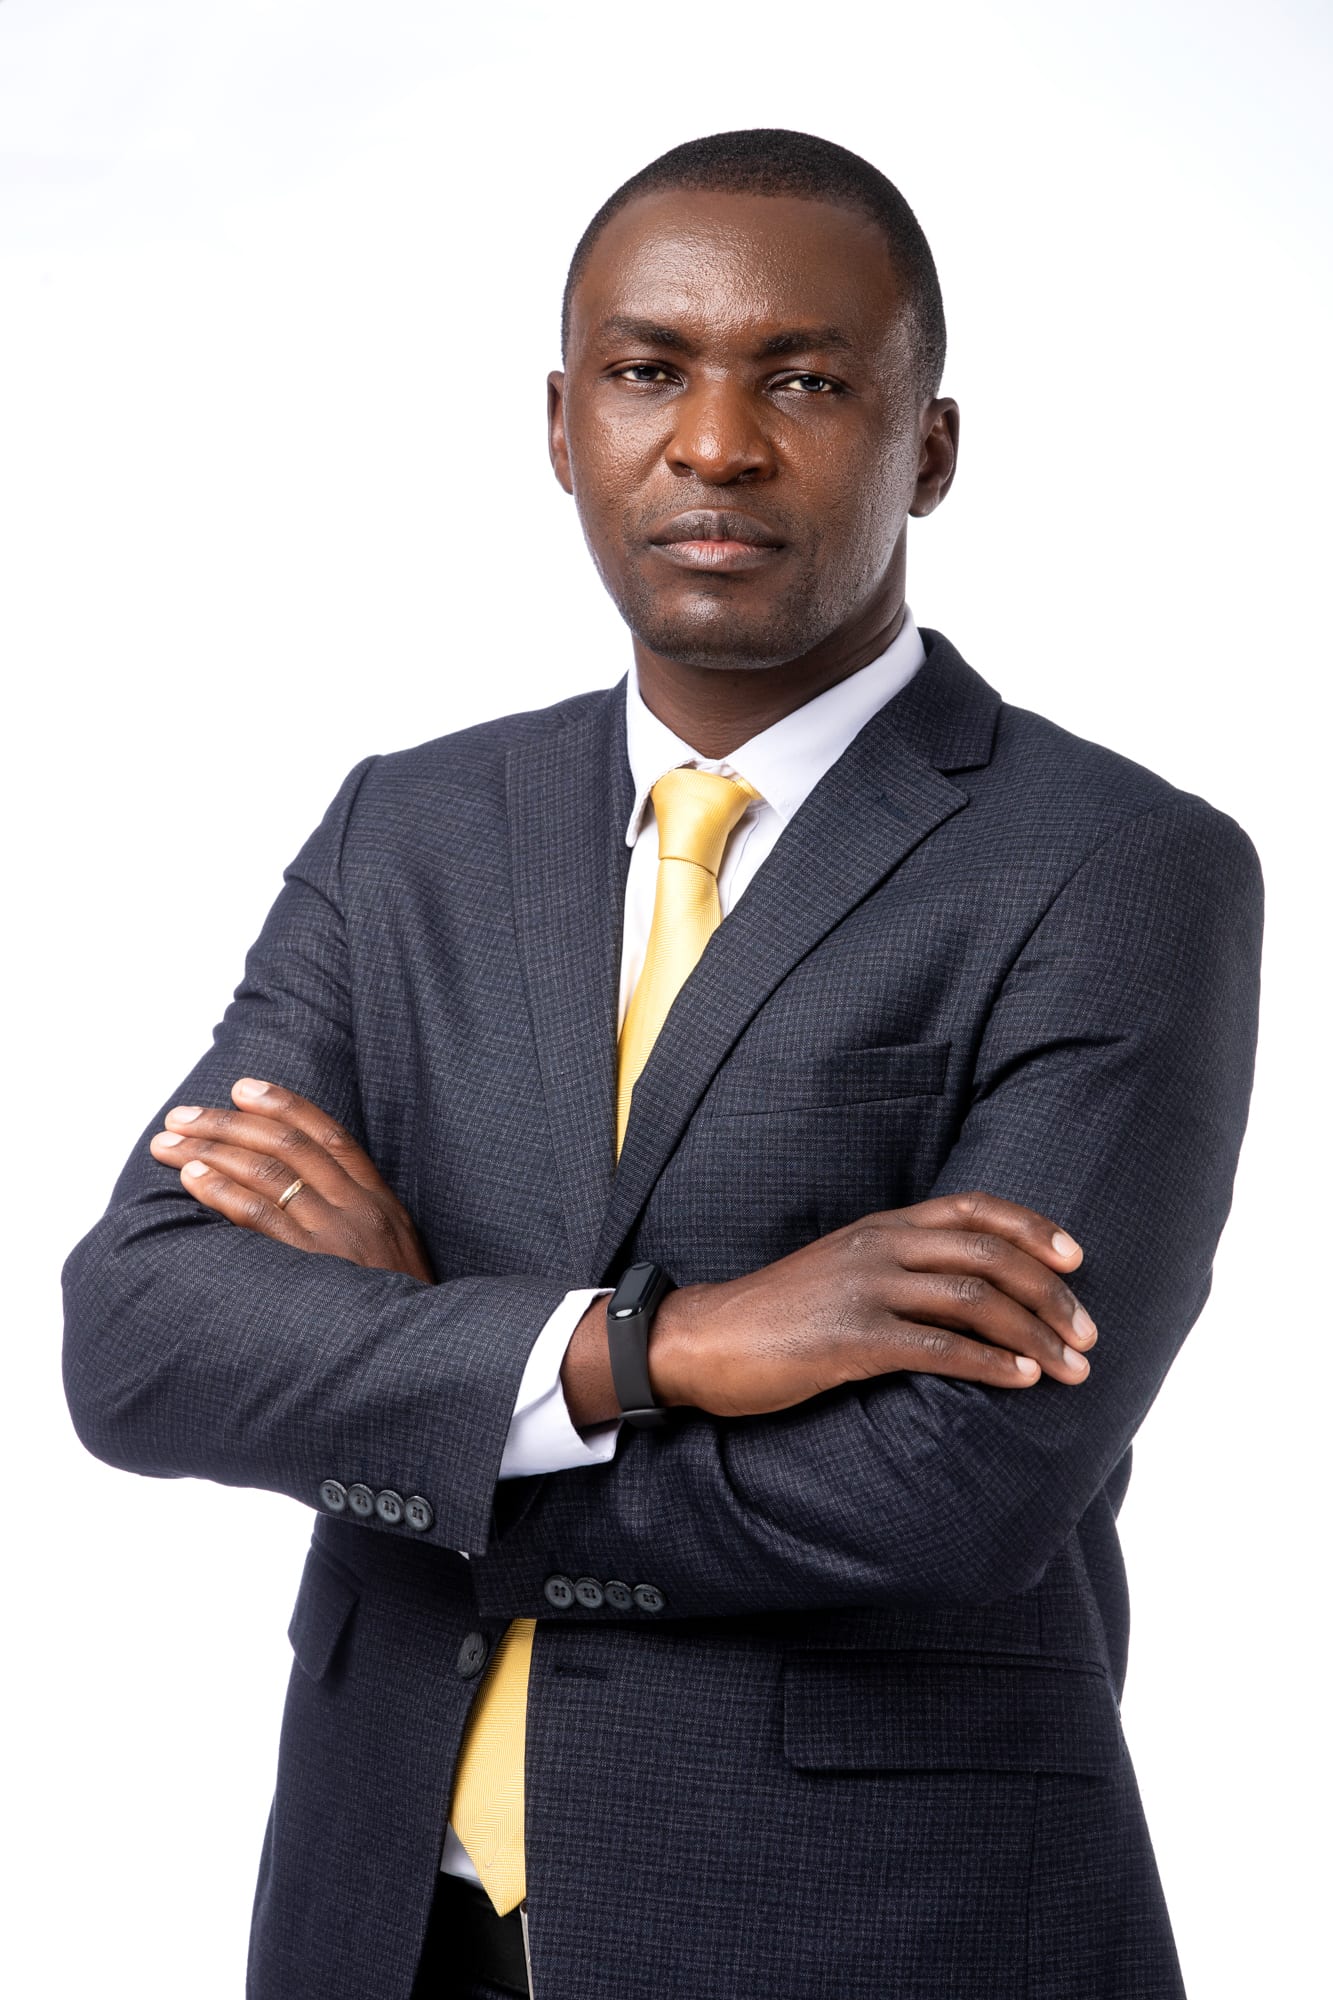 George Oyuga joins Zamara as Head of Umbrella and Retail Solutions